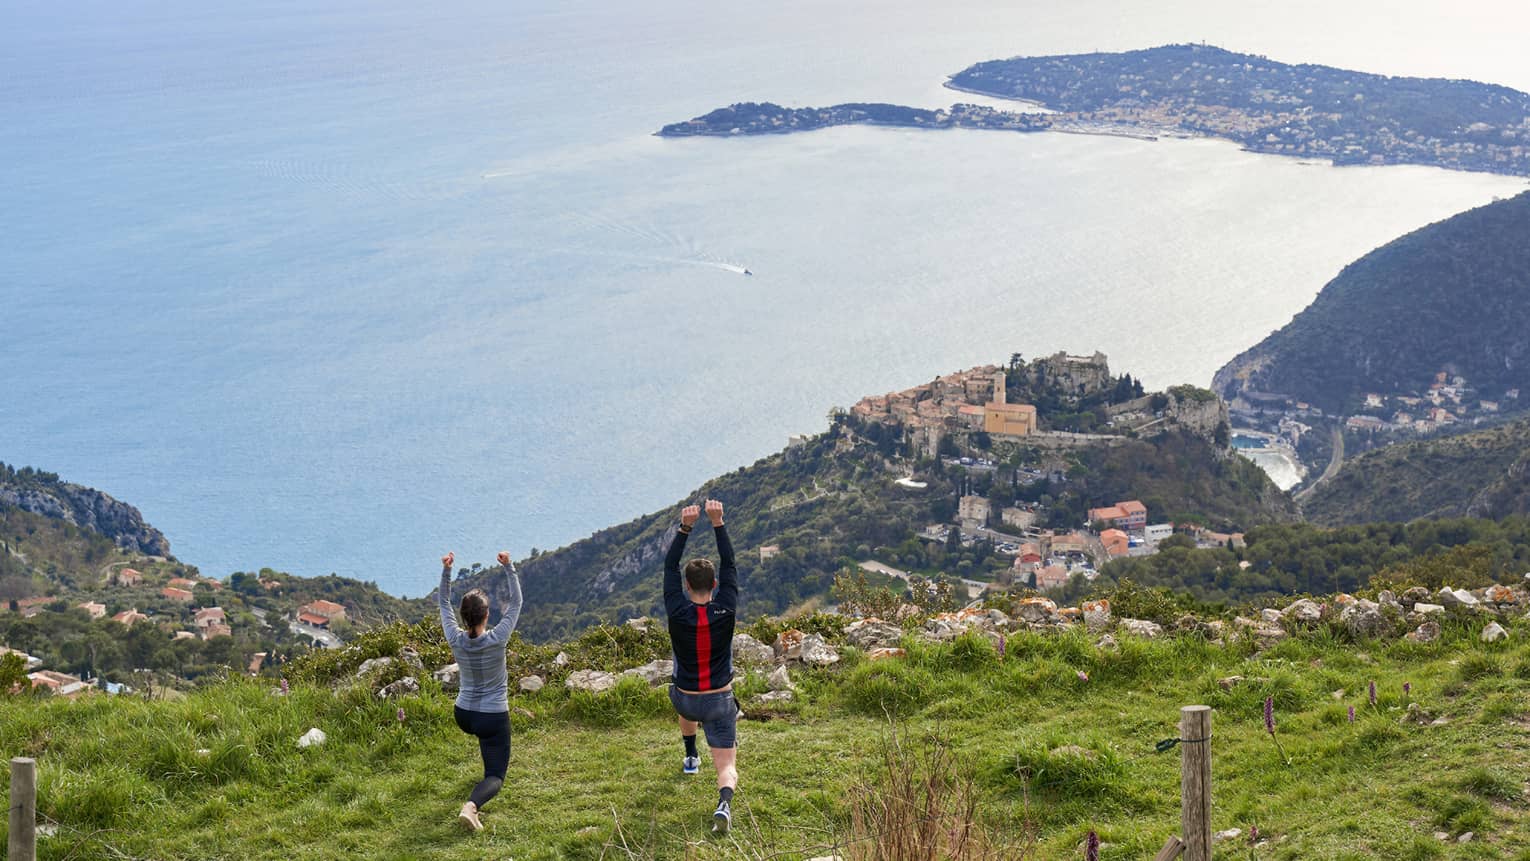 Rear view of woman and man doing yoga on green hilltop overlooking Mediterranean Sea